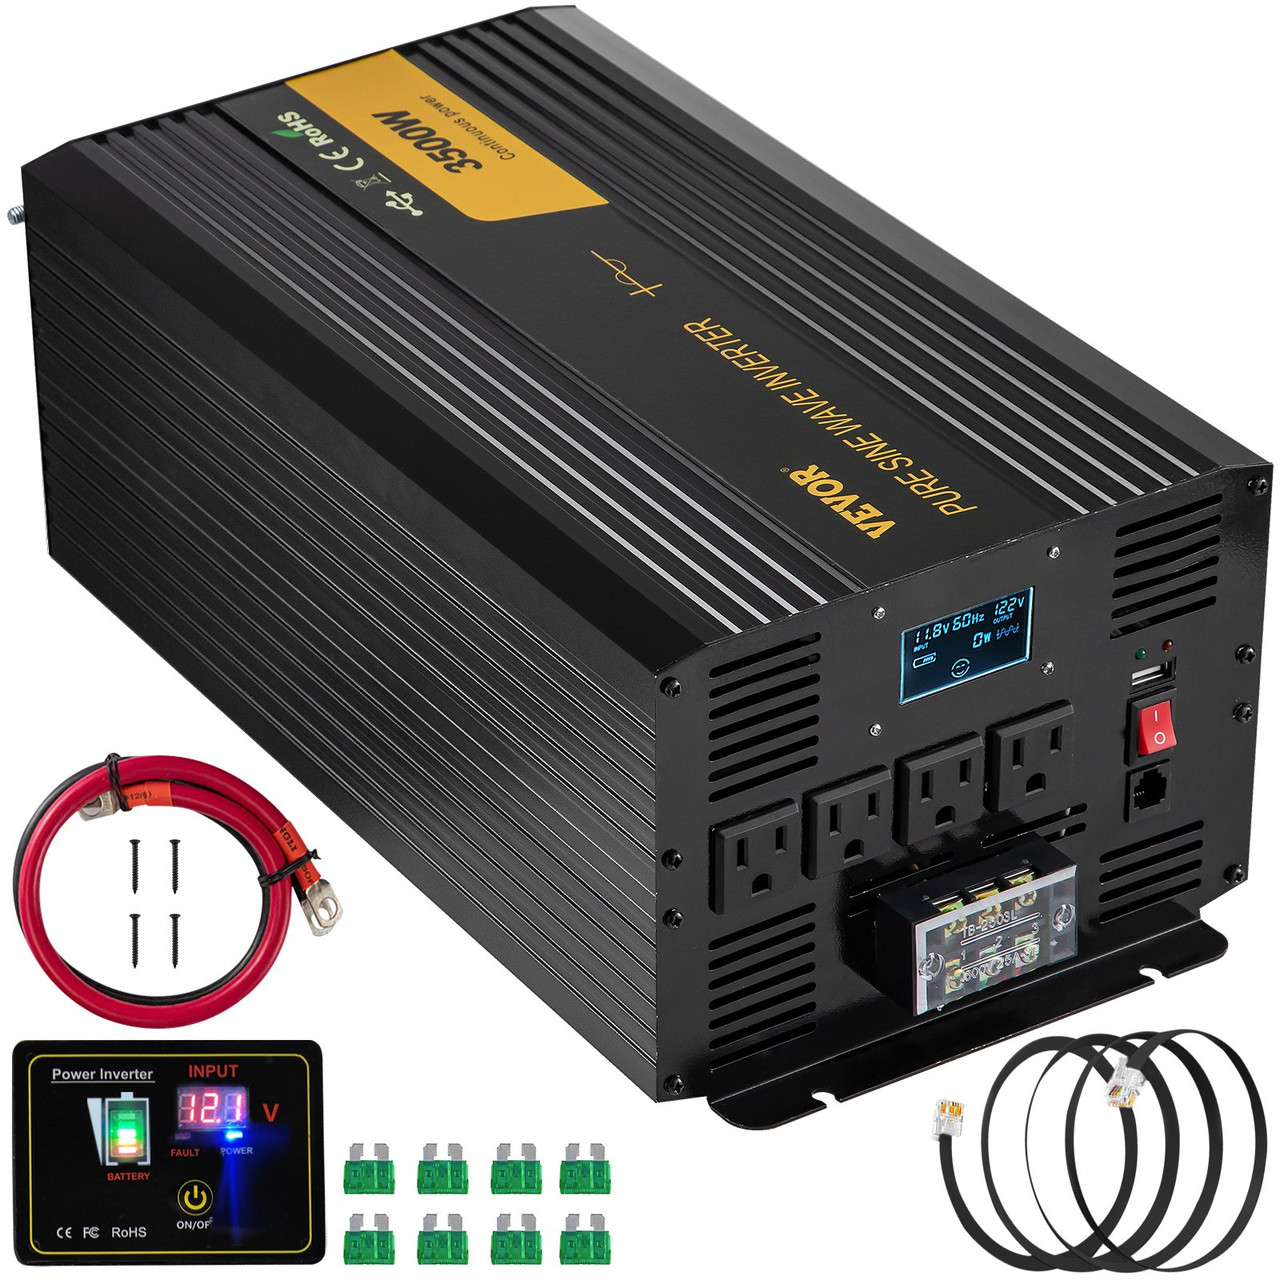 Pure Sine Wave Inverter 3500 Watt Power Inverter, DC 12V to AC 120V Car Inverter, with USB Port LCD Display Remote Controller and AC Outlets (GFCI), for RV Truck Car Solar System Travel Camping